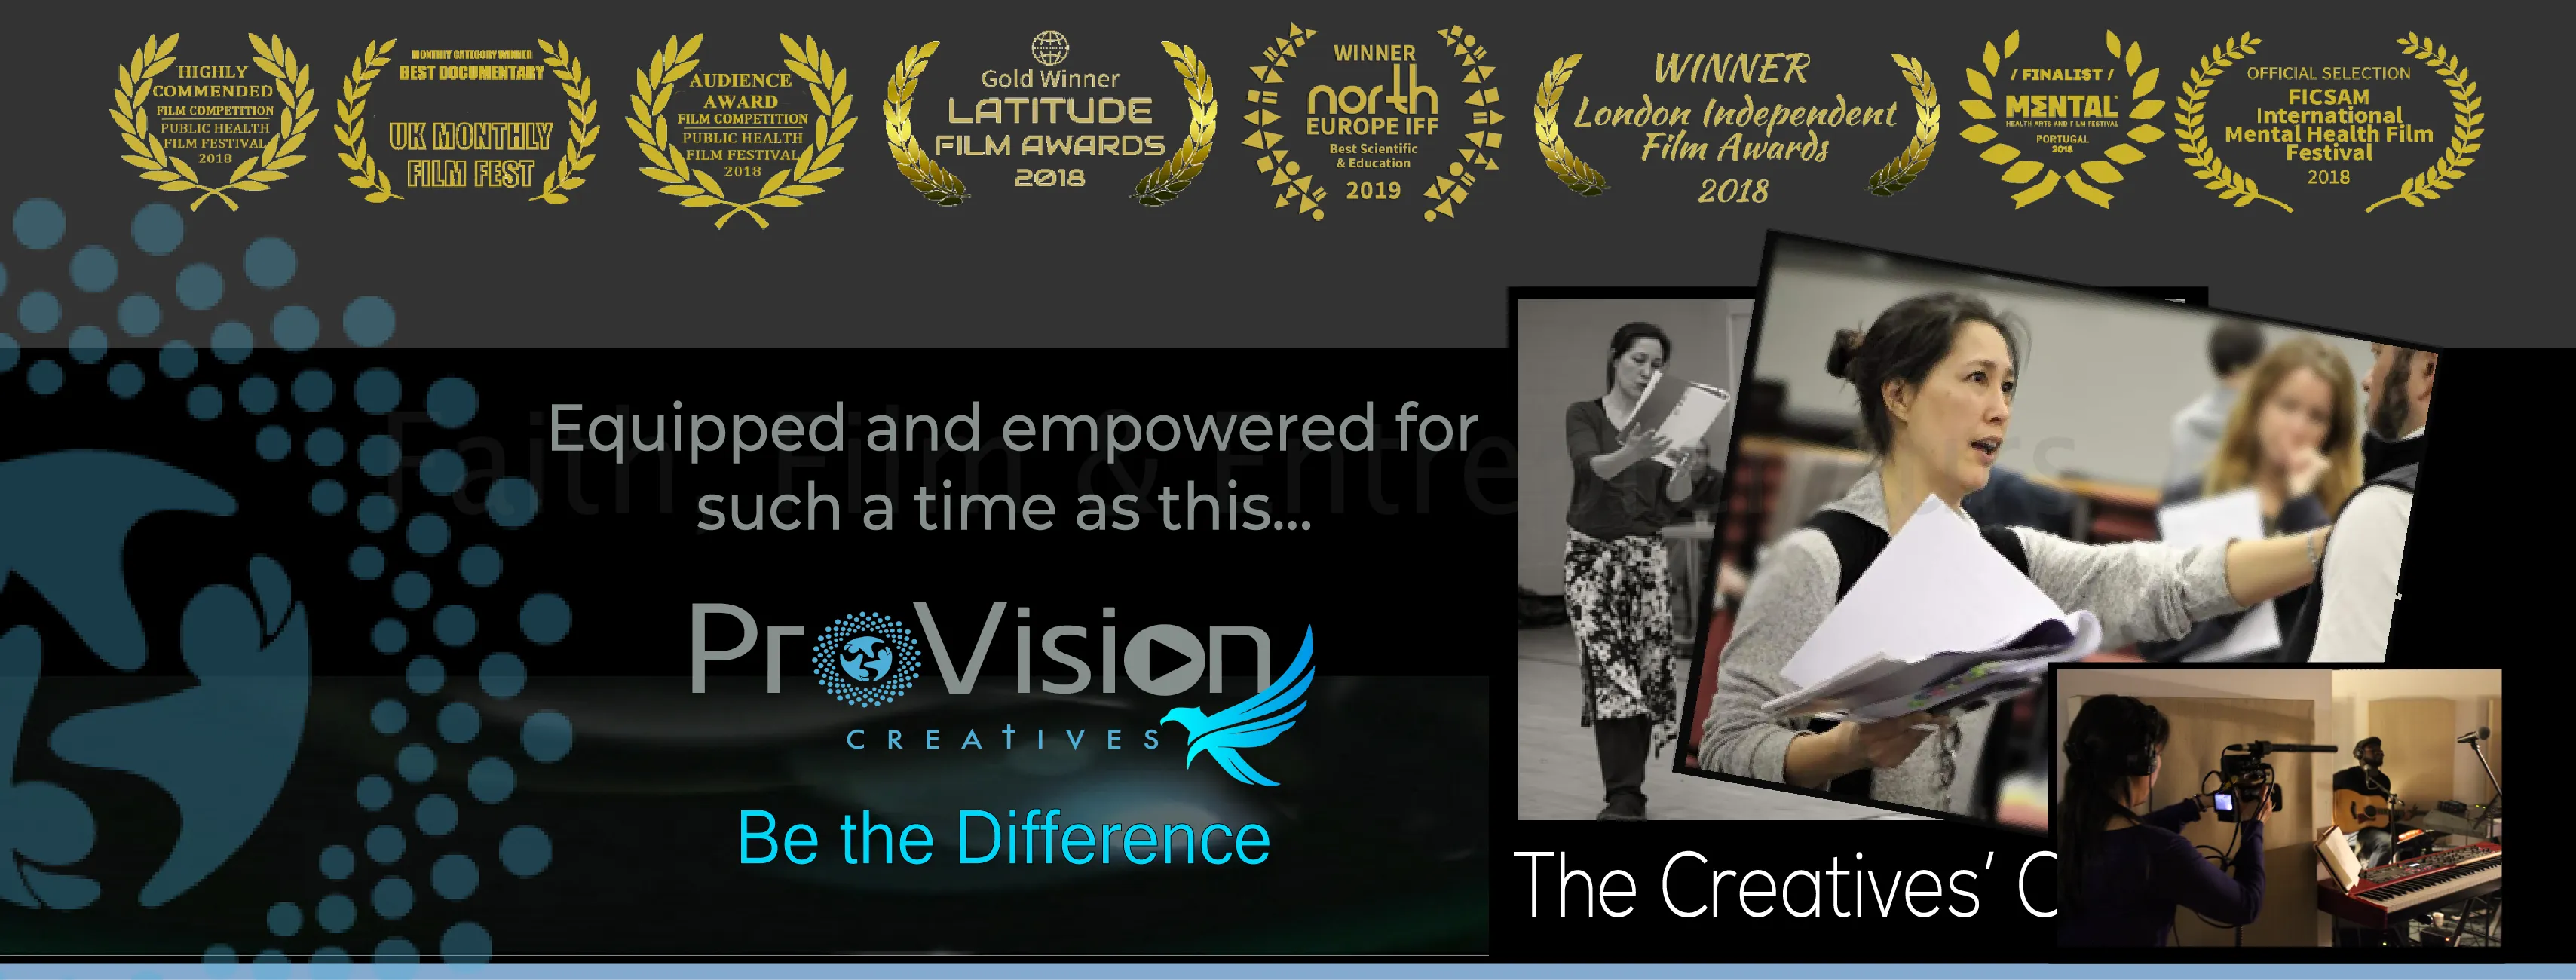 Creatives banner with Awards